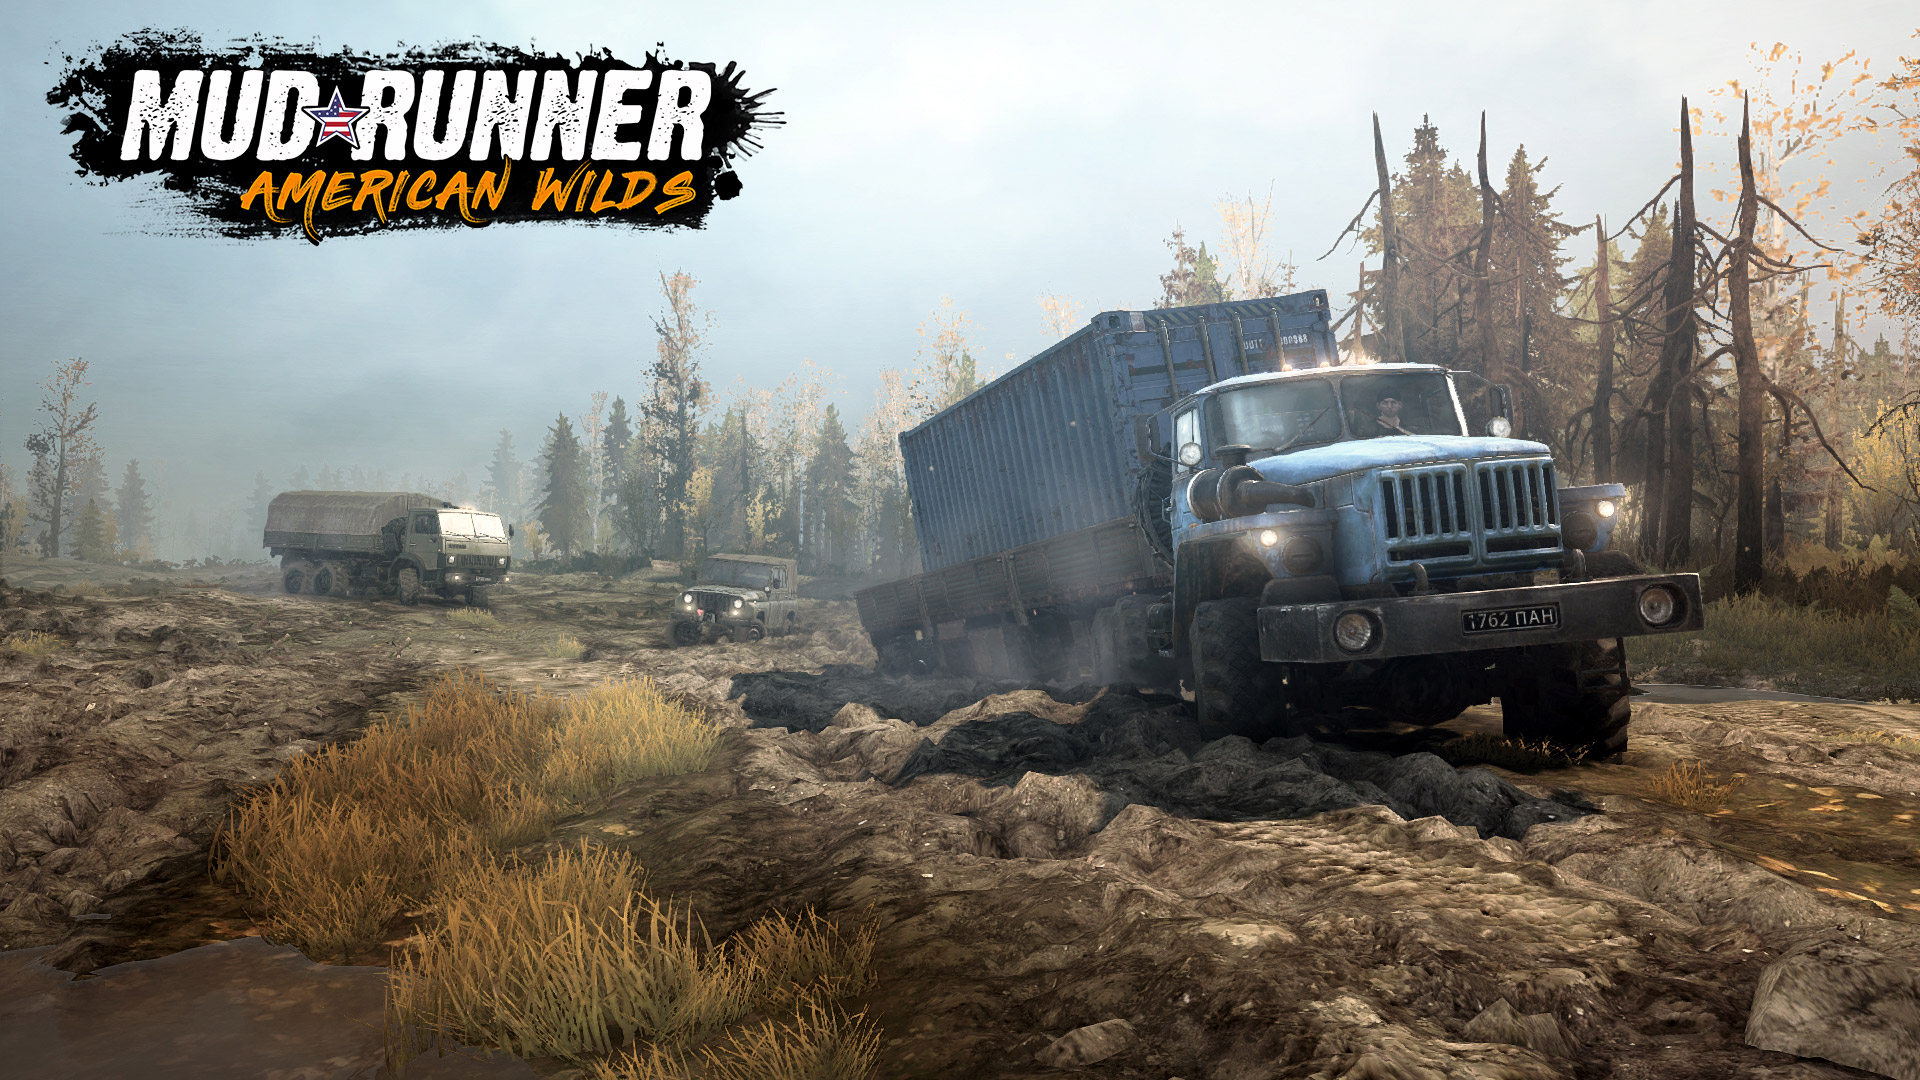 Expeditions a mudrunner game русский. MUDRUNNER American Wilds. MUDRUNNER American Wilds Edition. MUDRUNNER - American Wilds Expansion. MUDRUNNER лого.